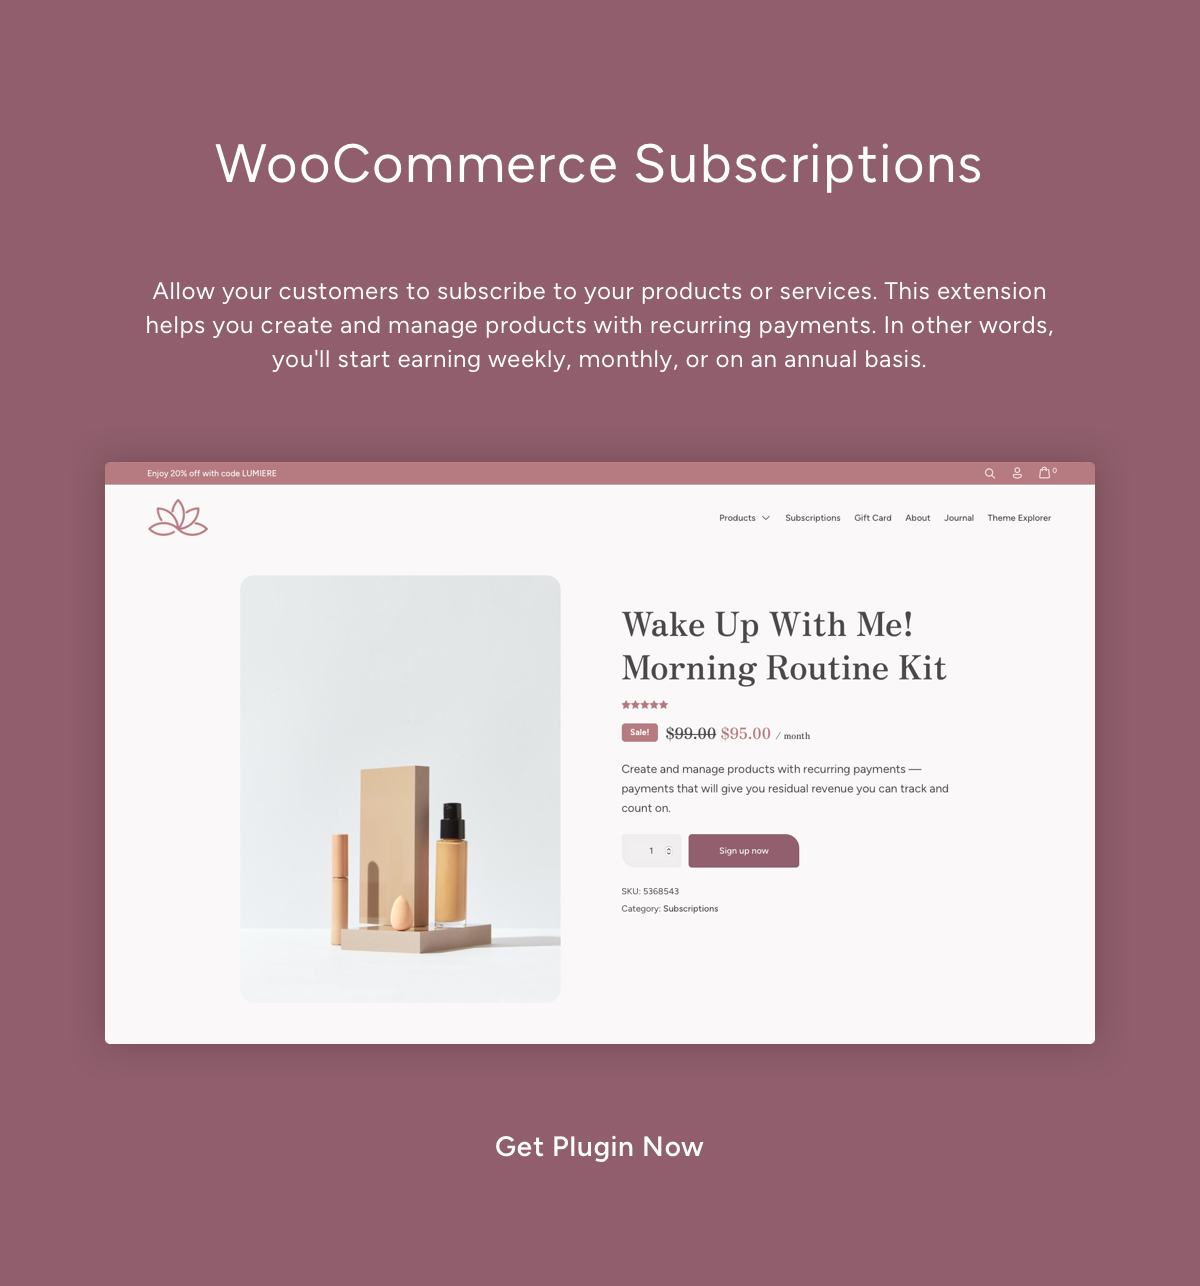 WooCommerce Subscriptions - Allow your customers to subscribe to your products or services. This extension helps you create and manage products with recurring payments. In other words, you'll start earning weekly, monthly, or on an annual basis.